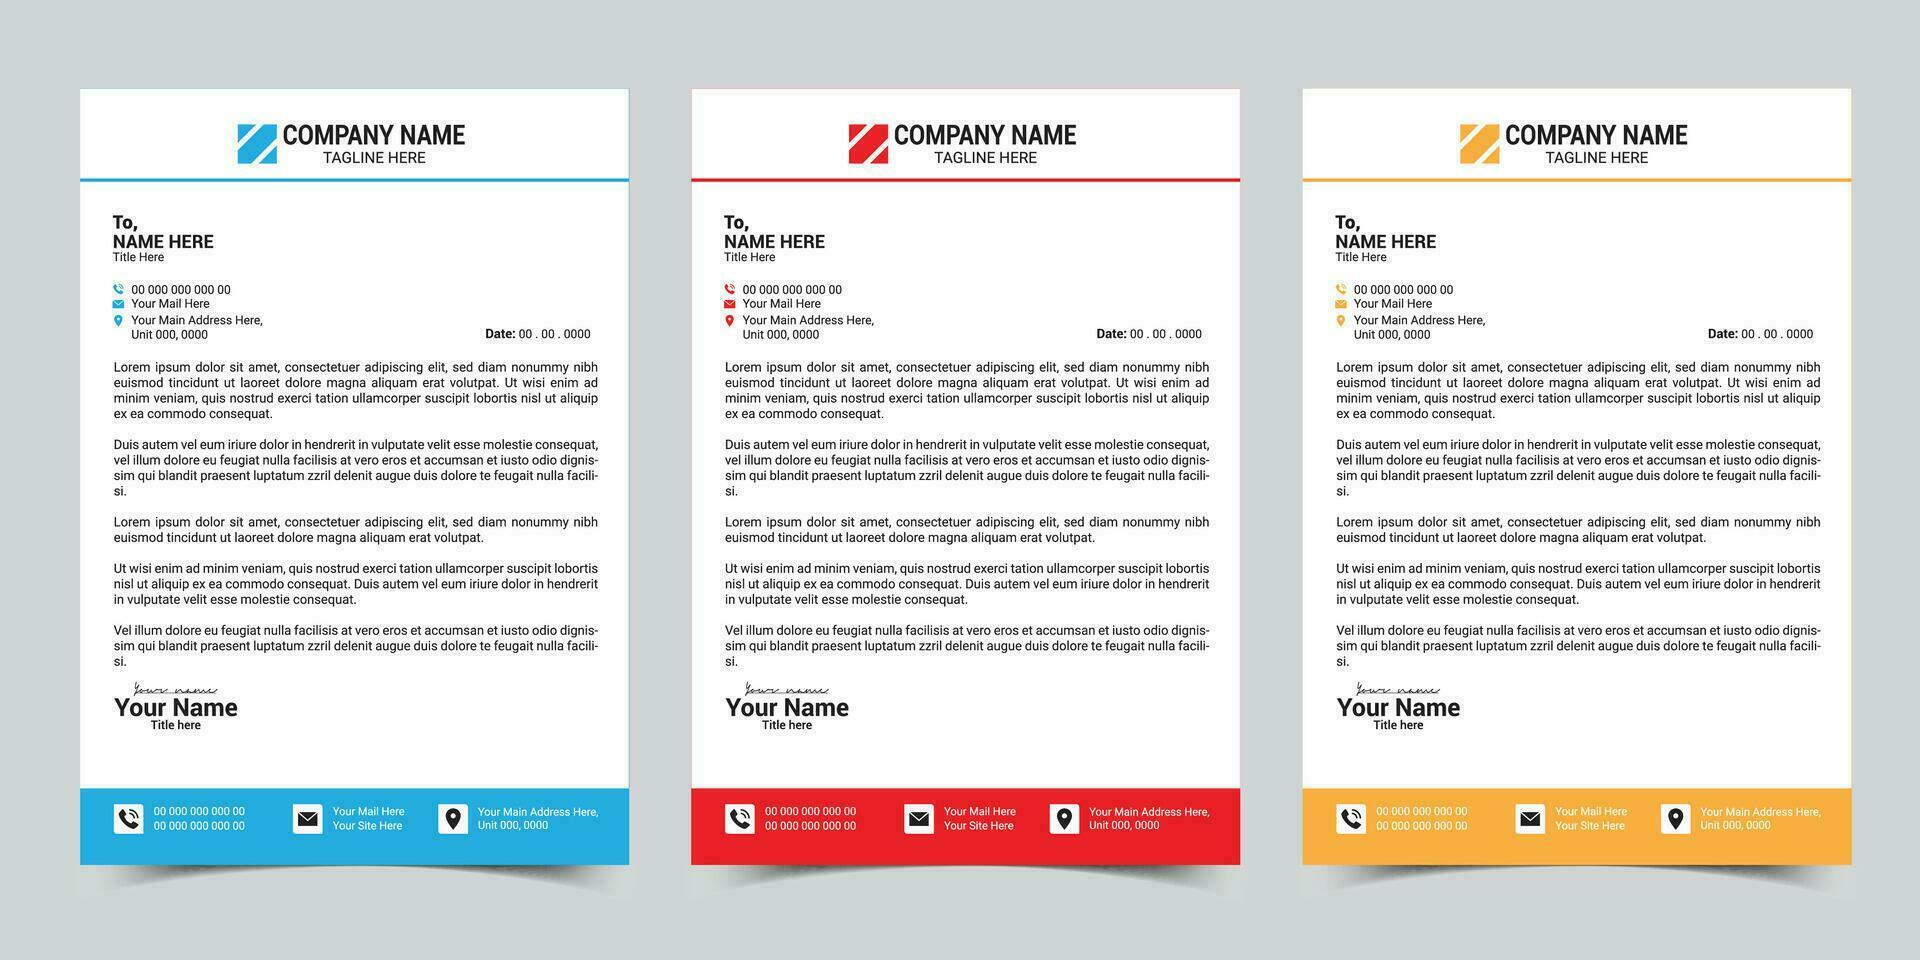 Corporate business letterhead design template with 3 color variation vector